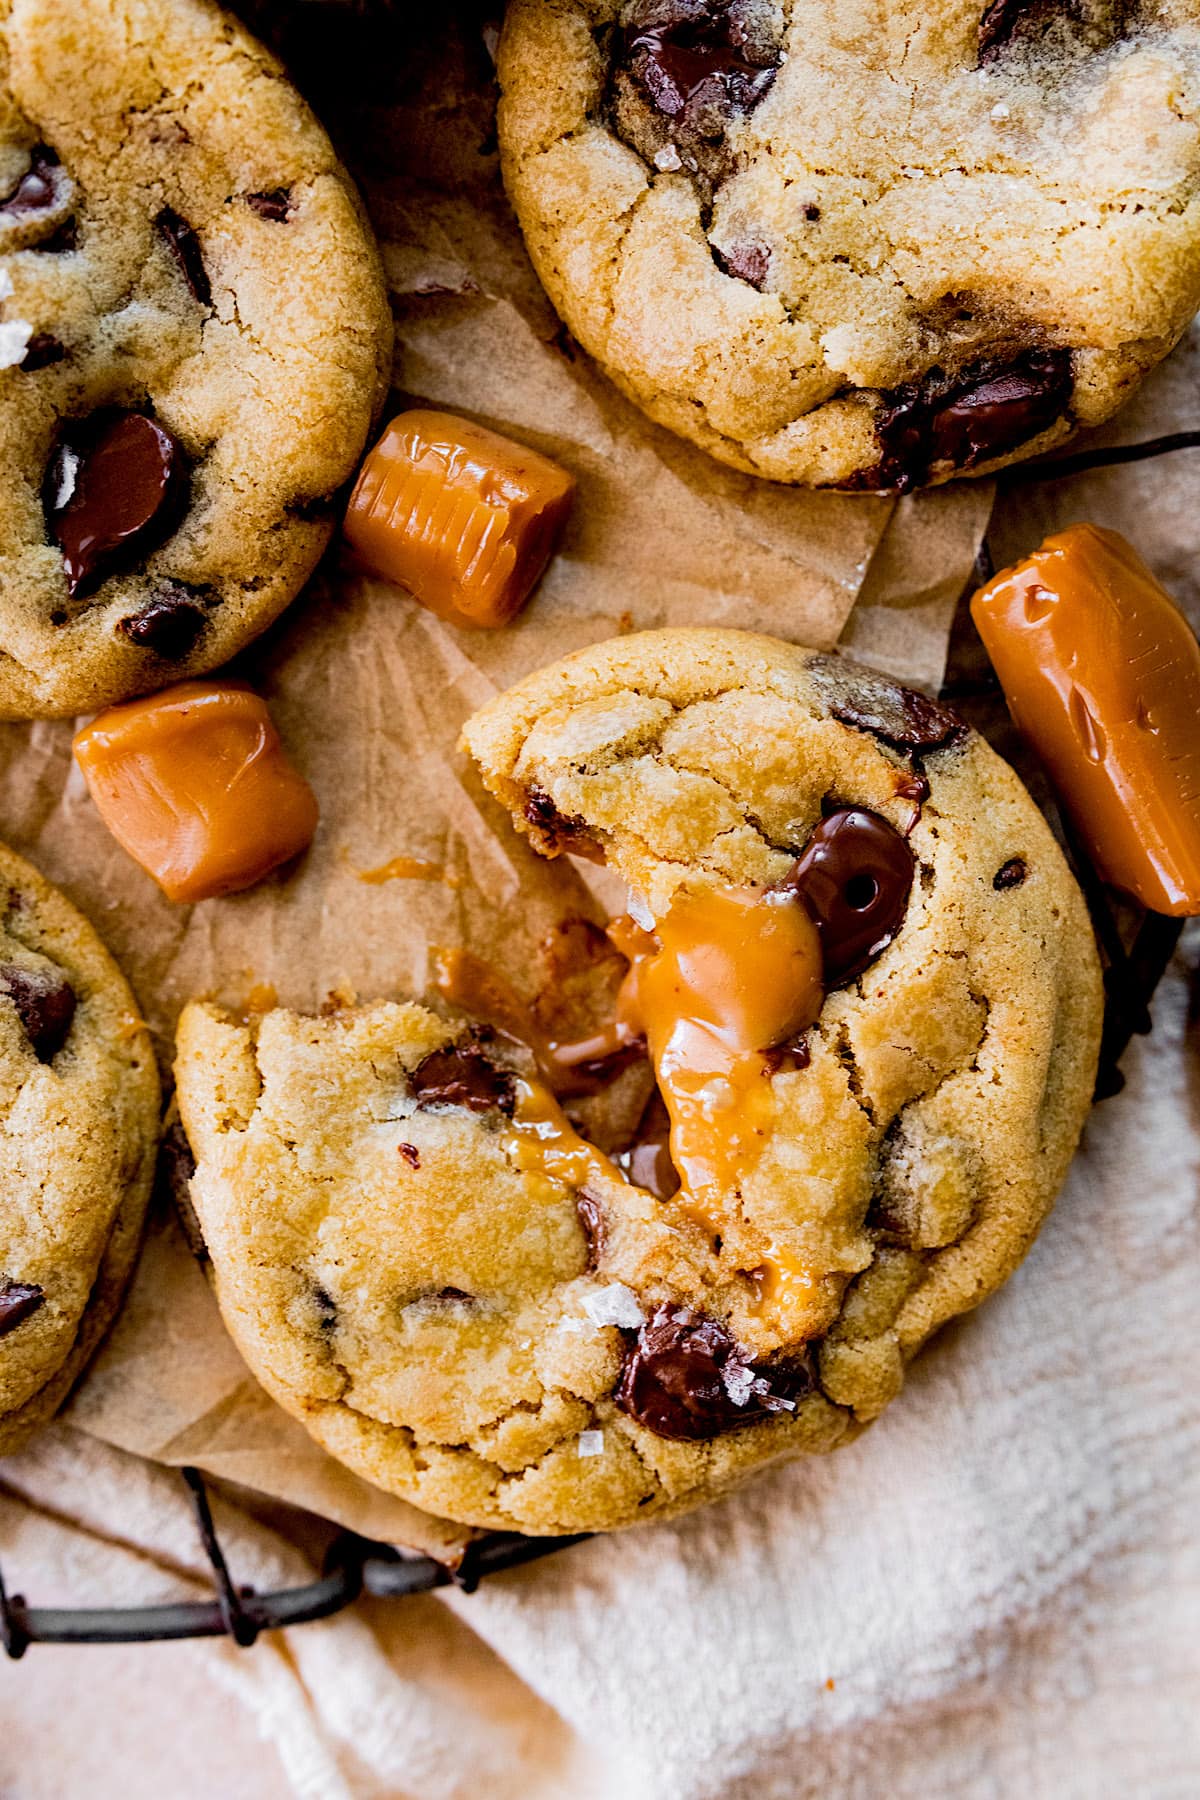 Instructions for making Salted Caramel Chocolate Chip Cookies